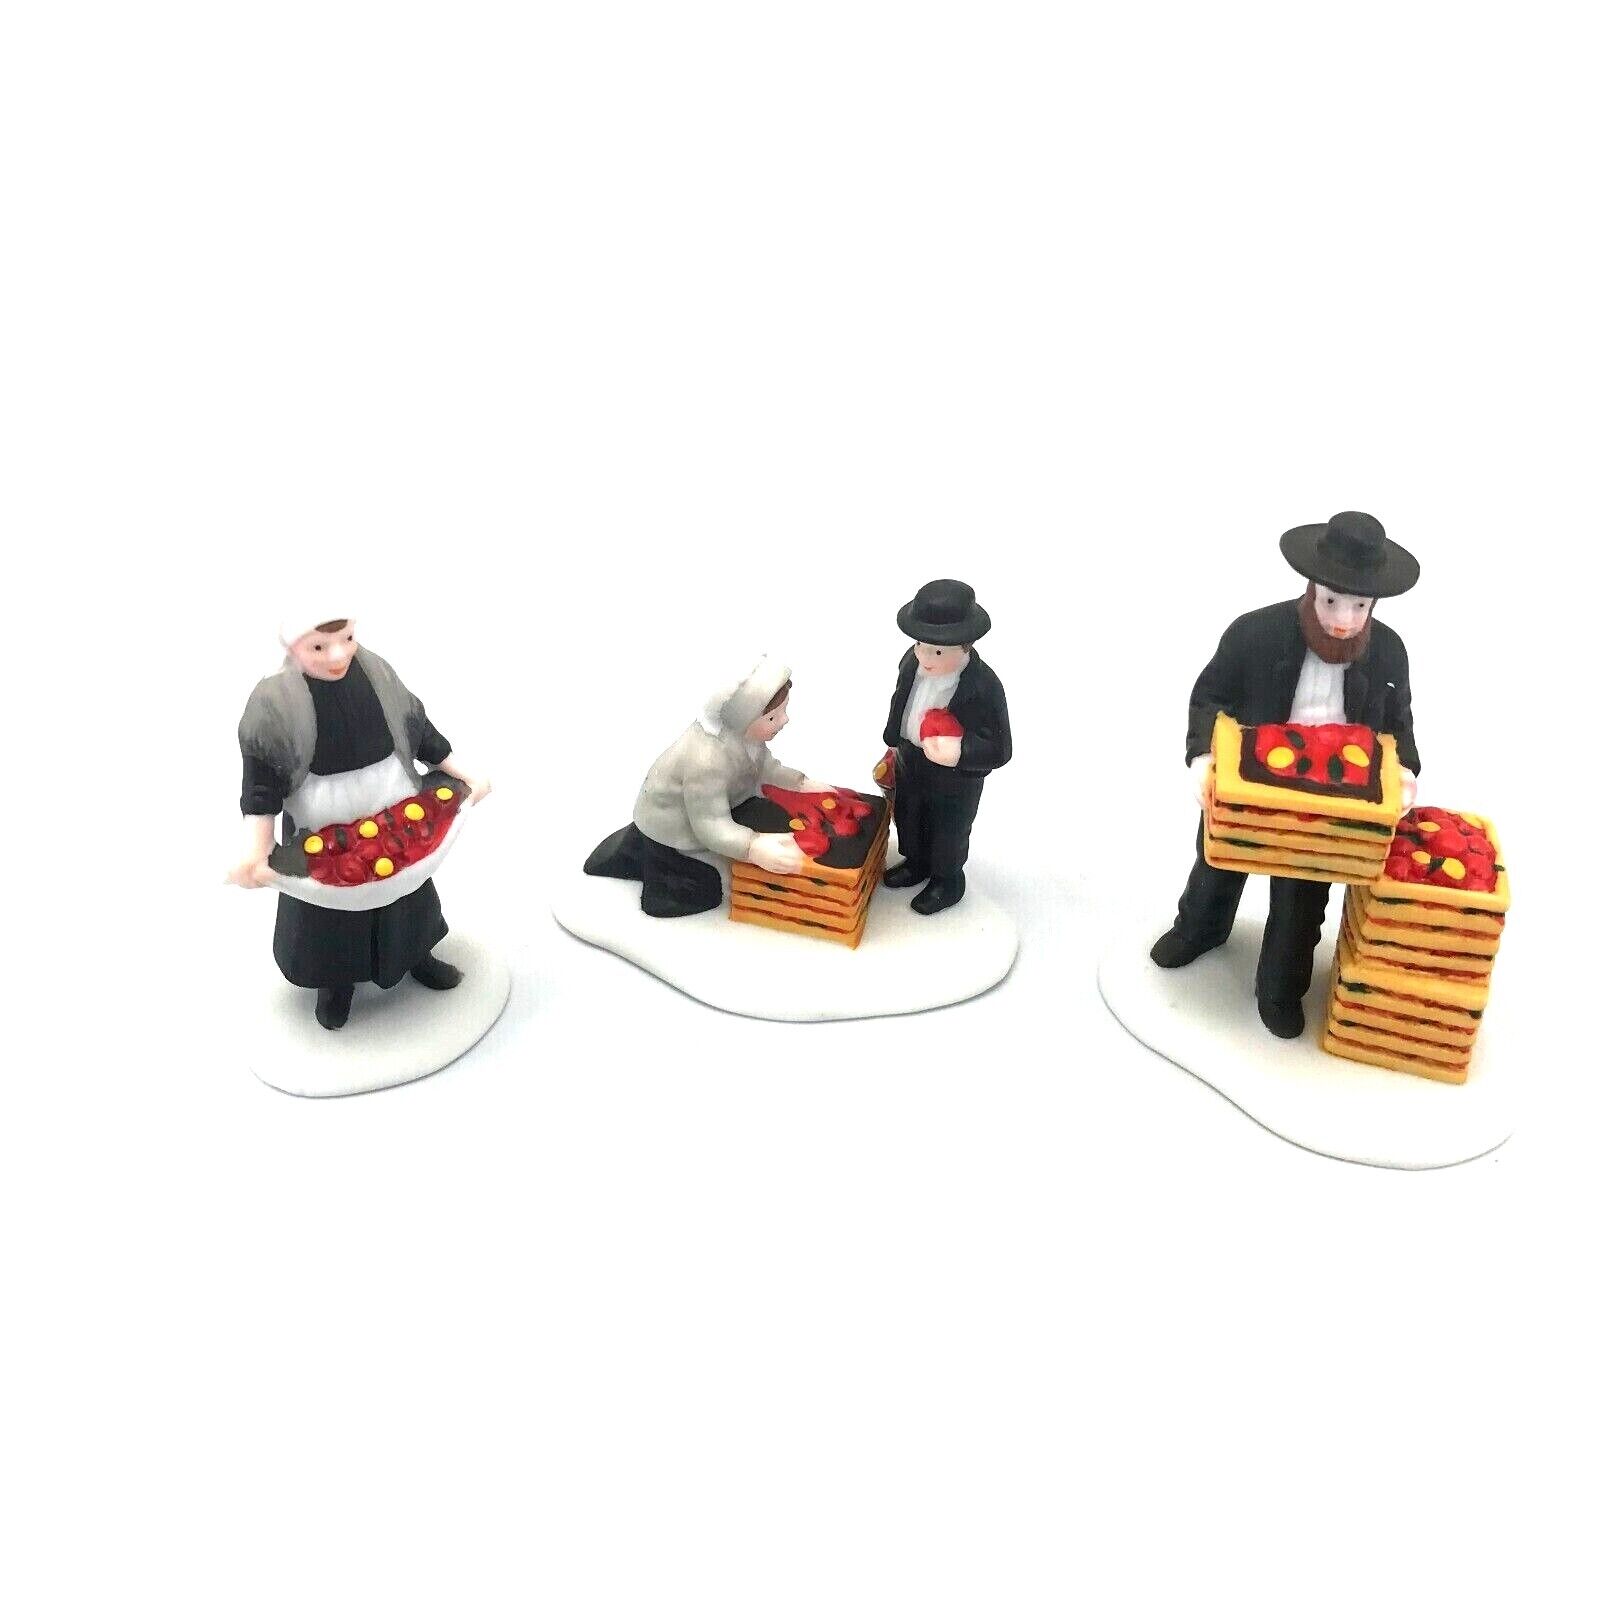 Dept 56 Heritage Village Collection 1992 Set of 3 Amish Family 5948-0 Figurines